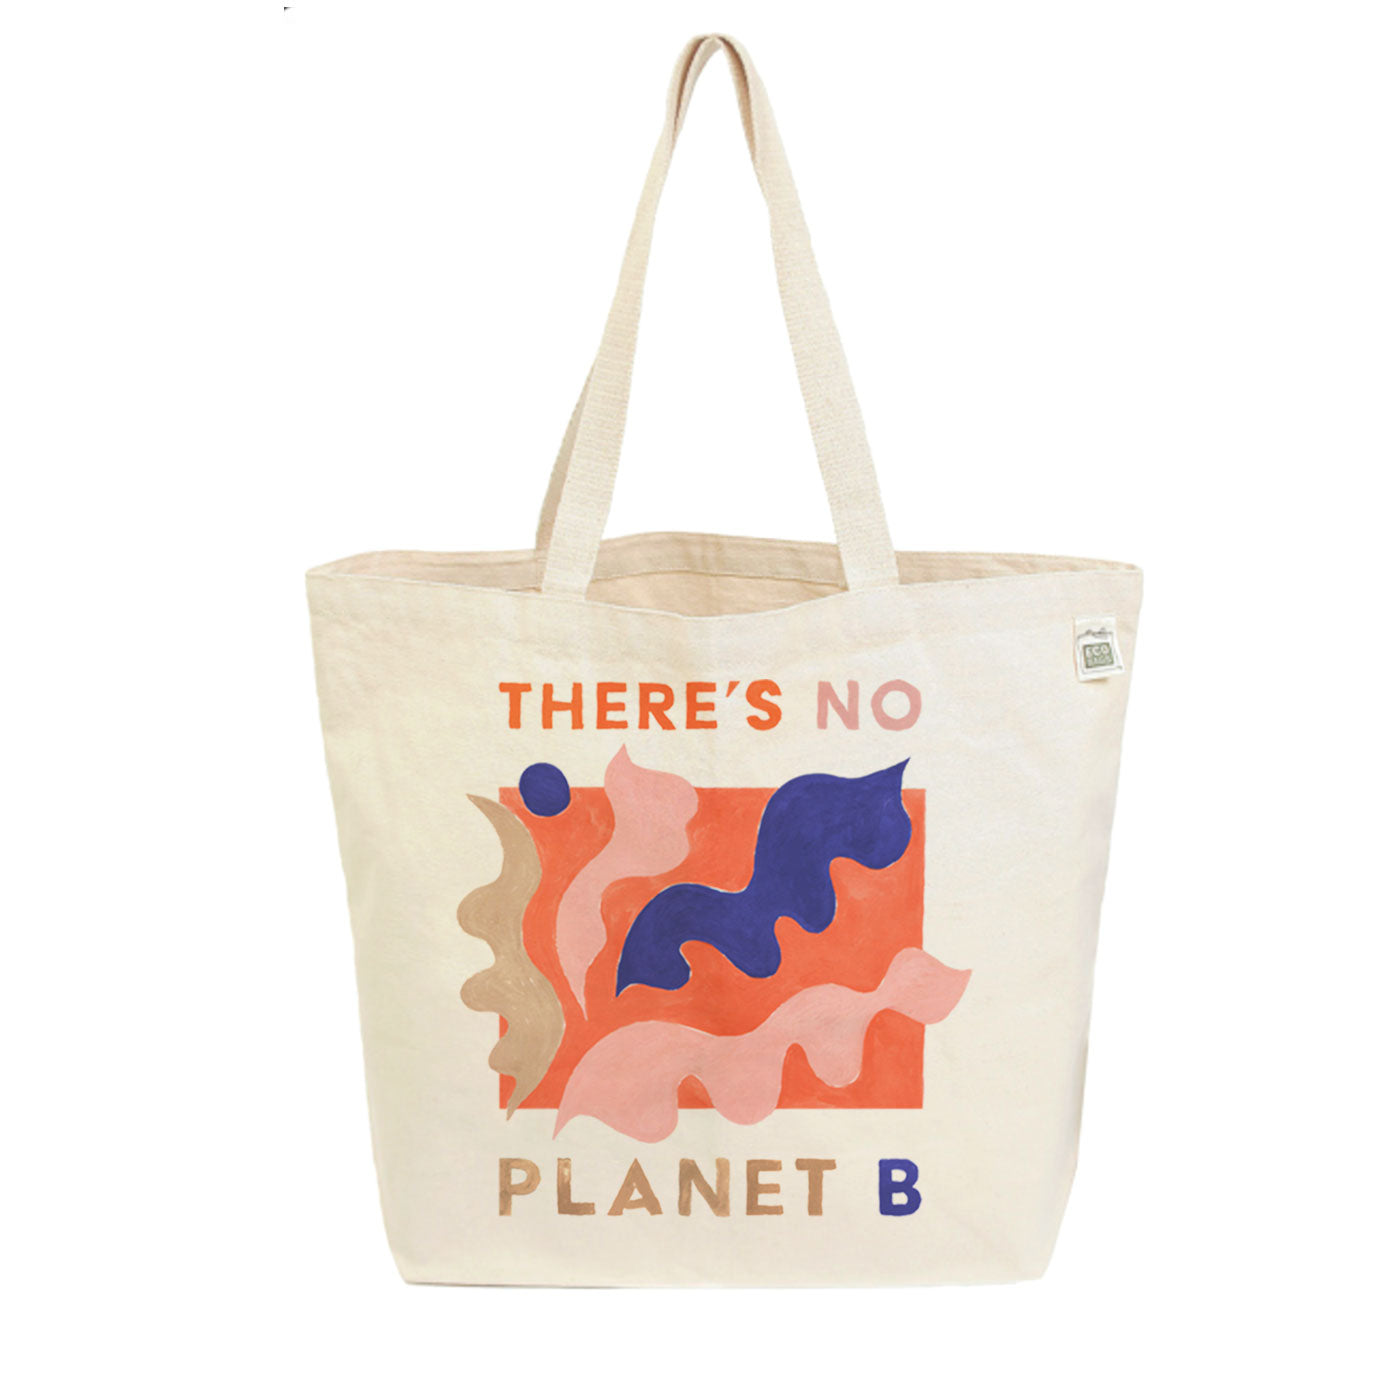 The New York Tote Bag – eco friendly heavyweight fabric